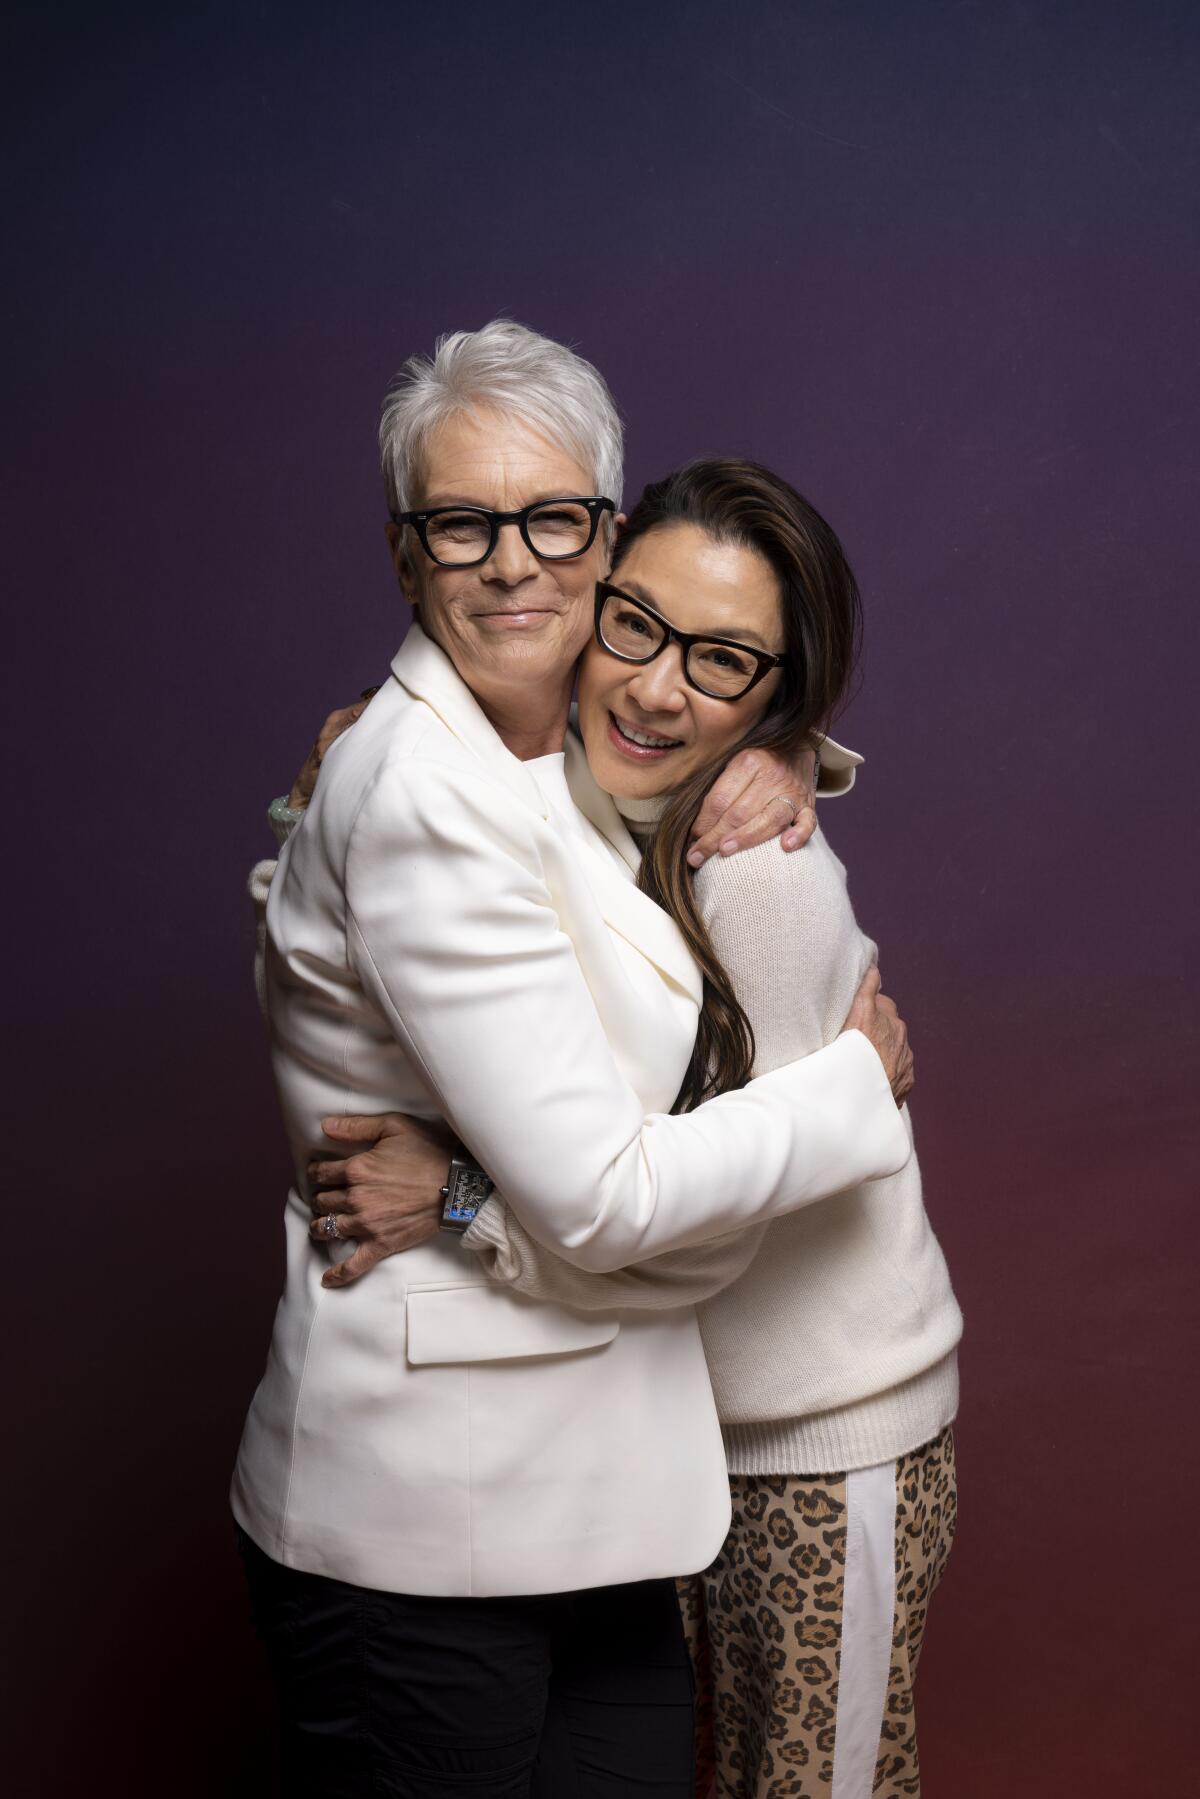 Jamie Lee Curtis and Michelle Yeoh hug for a portrait.